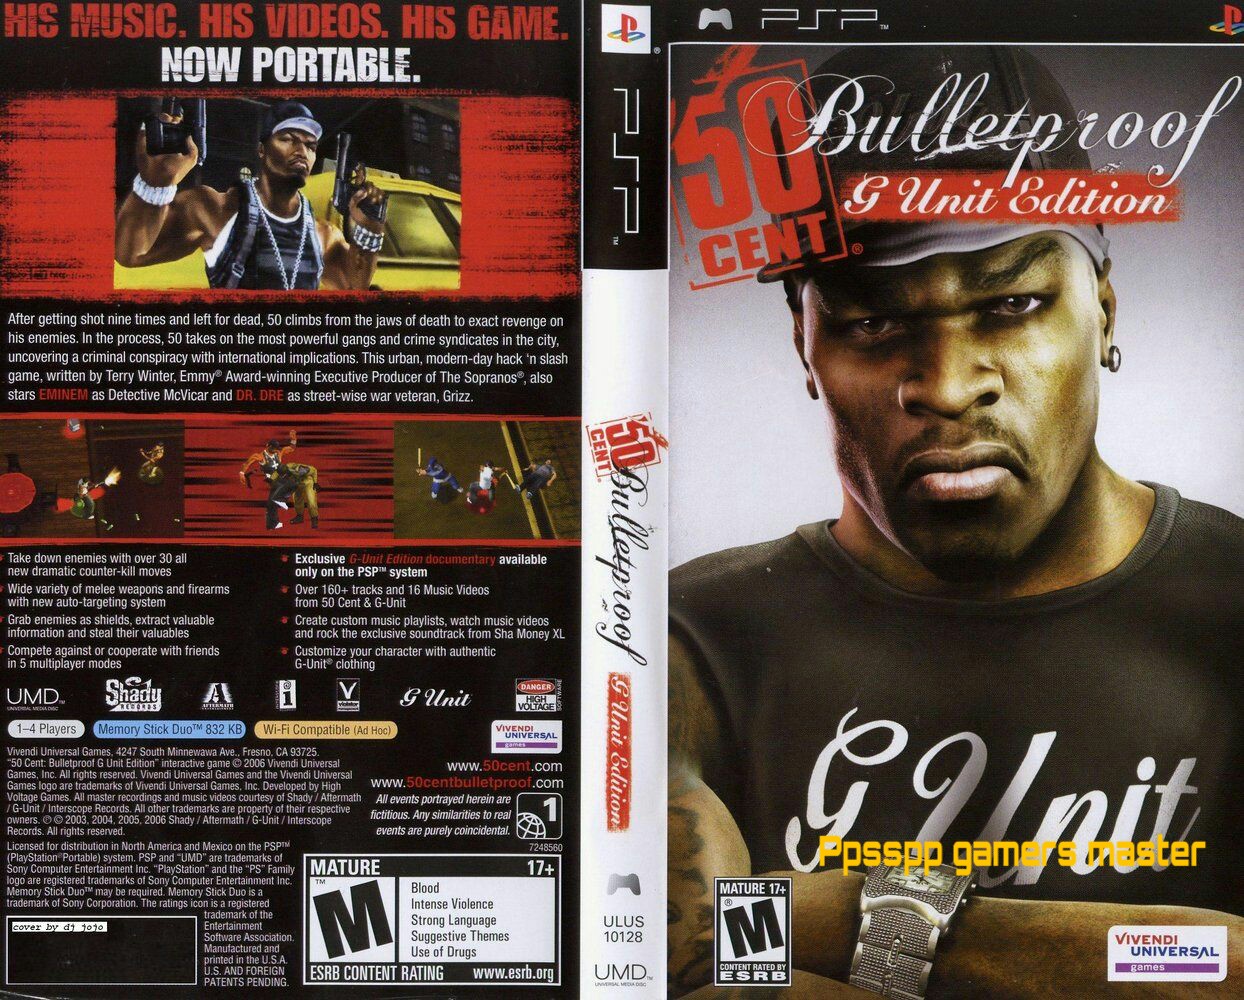 50 cent bulletproof g-unit edition for ppsspp | Ppsspp gamers master